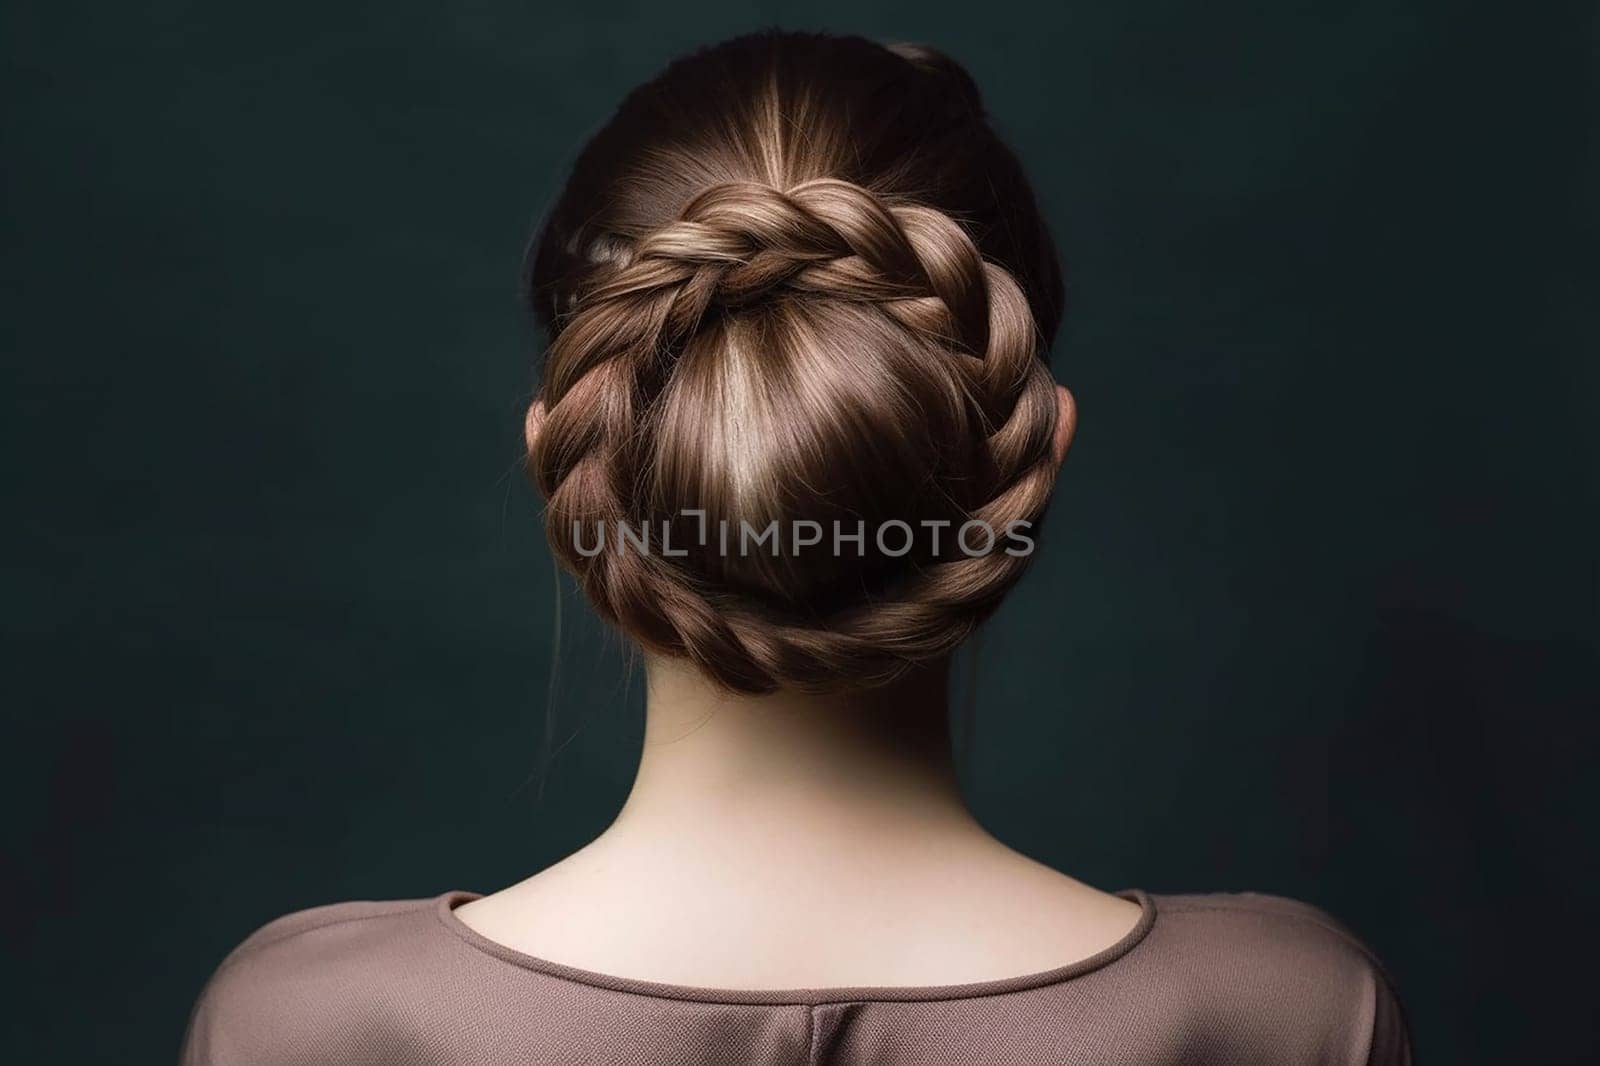 Elegant braided hairstyle on a woman against a dark background.